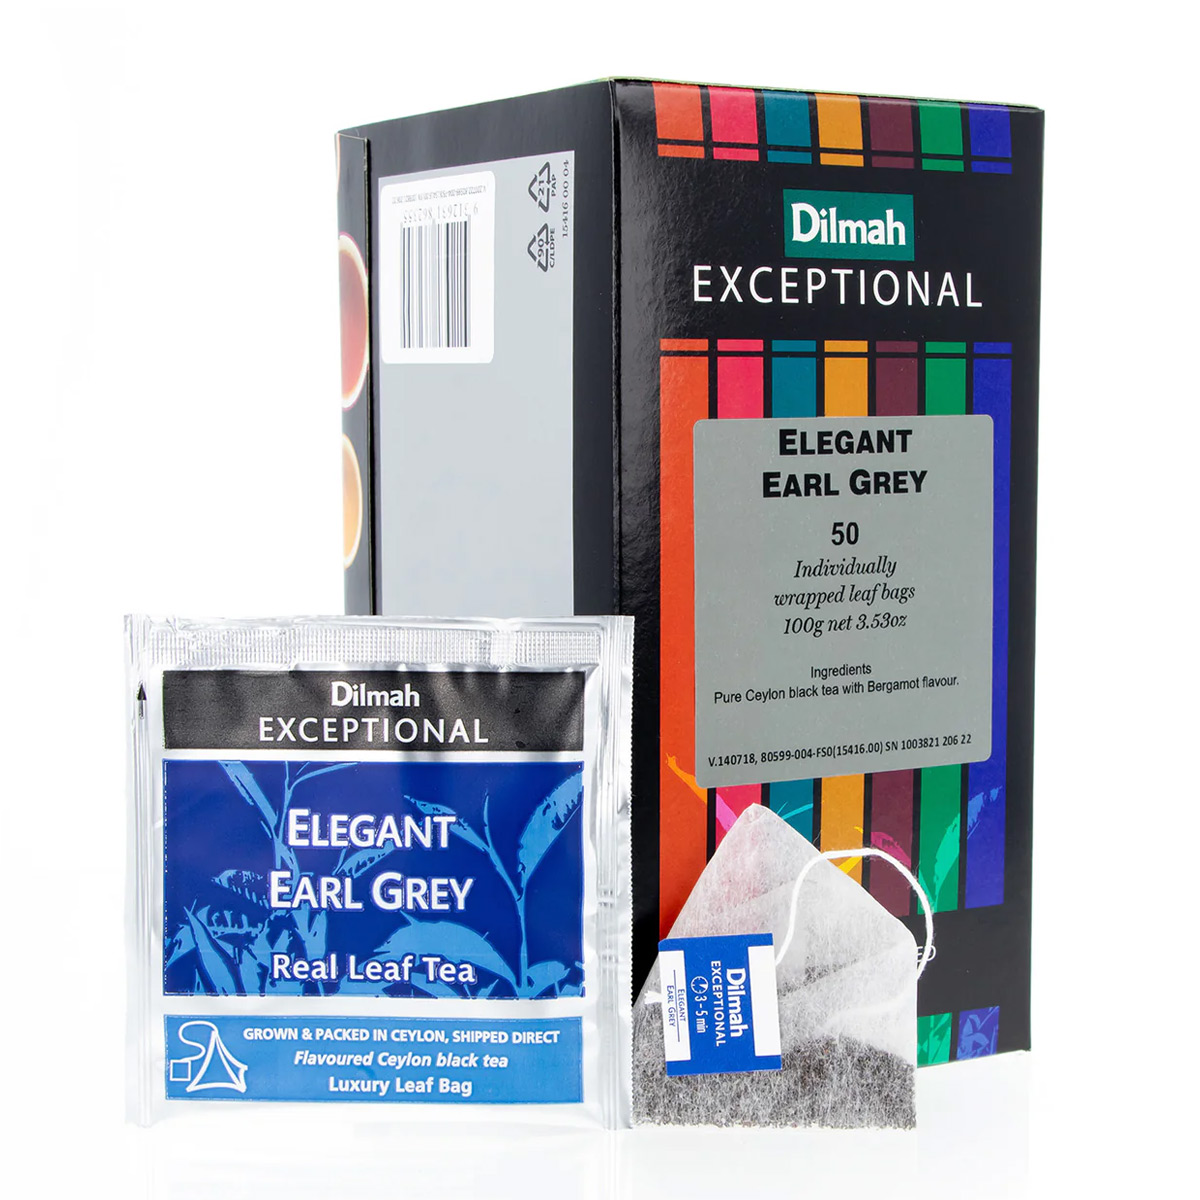 consumables-hospitality-beverage-food-dilmah-exceptionals-elegant-earl-grey-tea-bag-50-luxury-pyramid-tea-bag-range-freshness-and-authenticity-of-flavour-vjs-distributors-hawkes-bay-nz-80599004